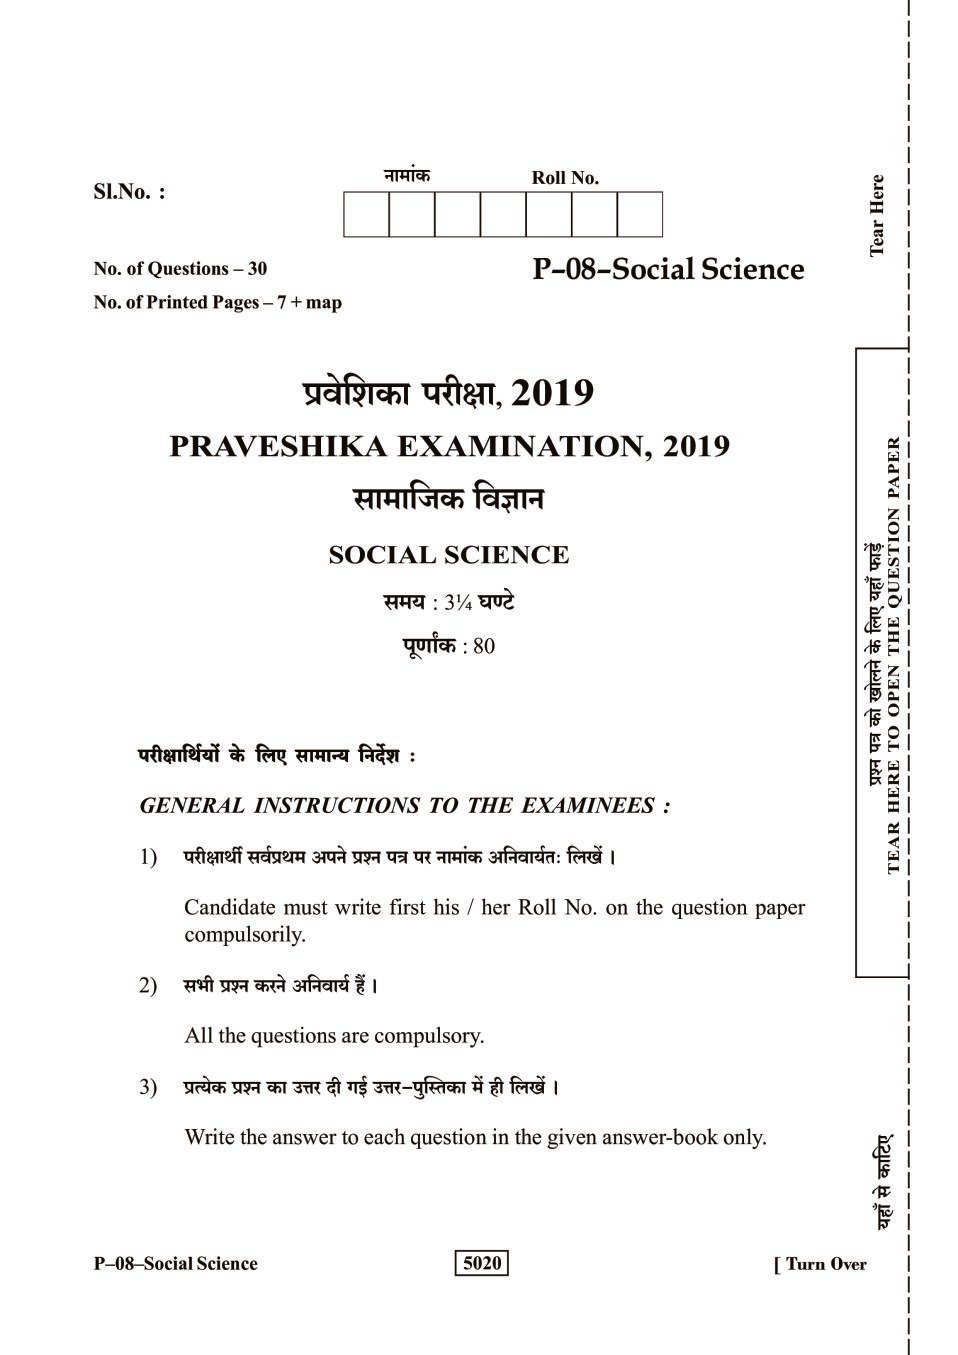 Rajasthan Board Praveshika Social Science Question Paper 2019 - Page 1